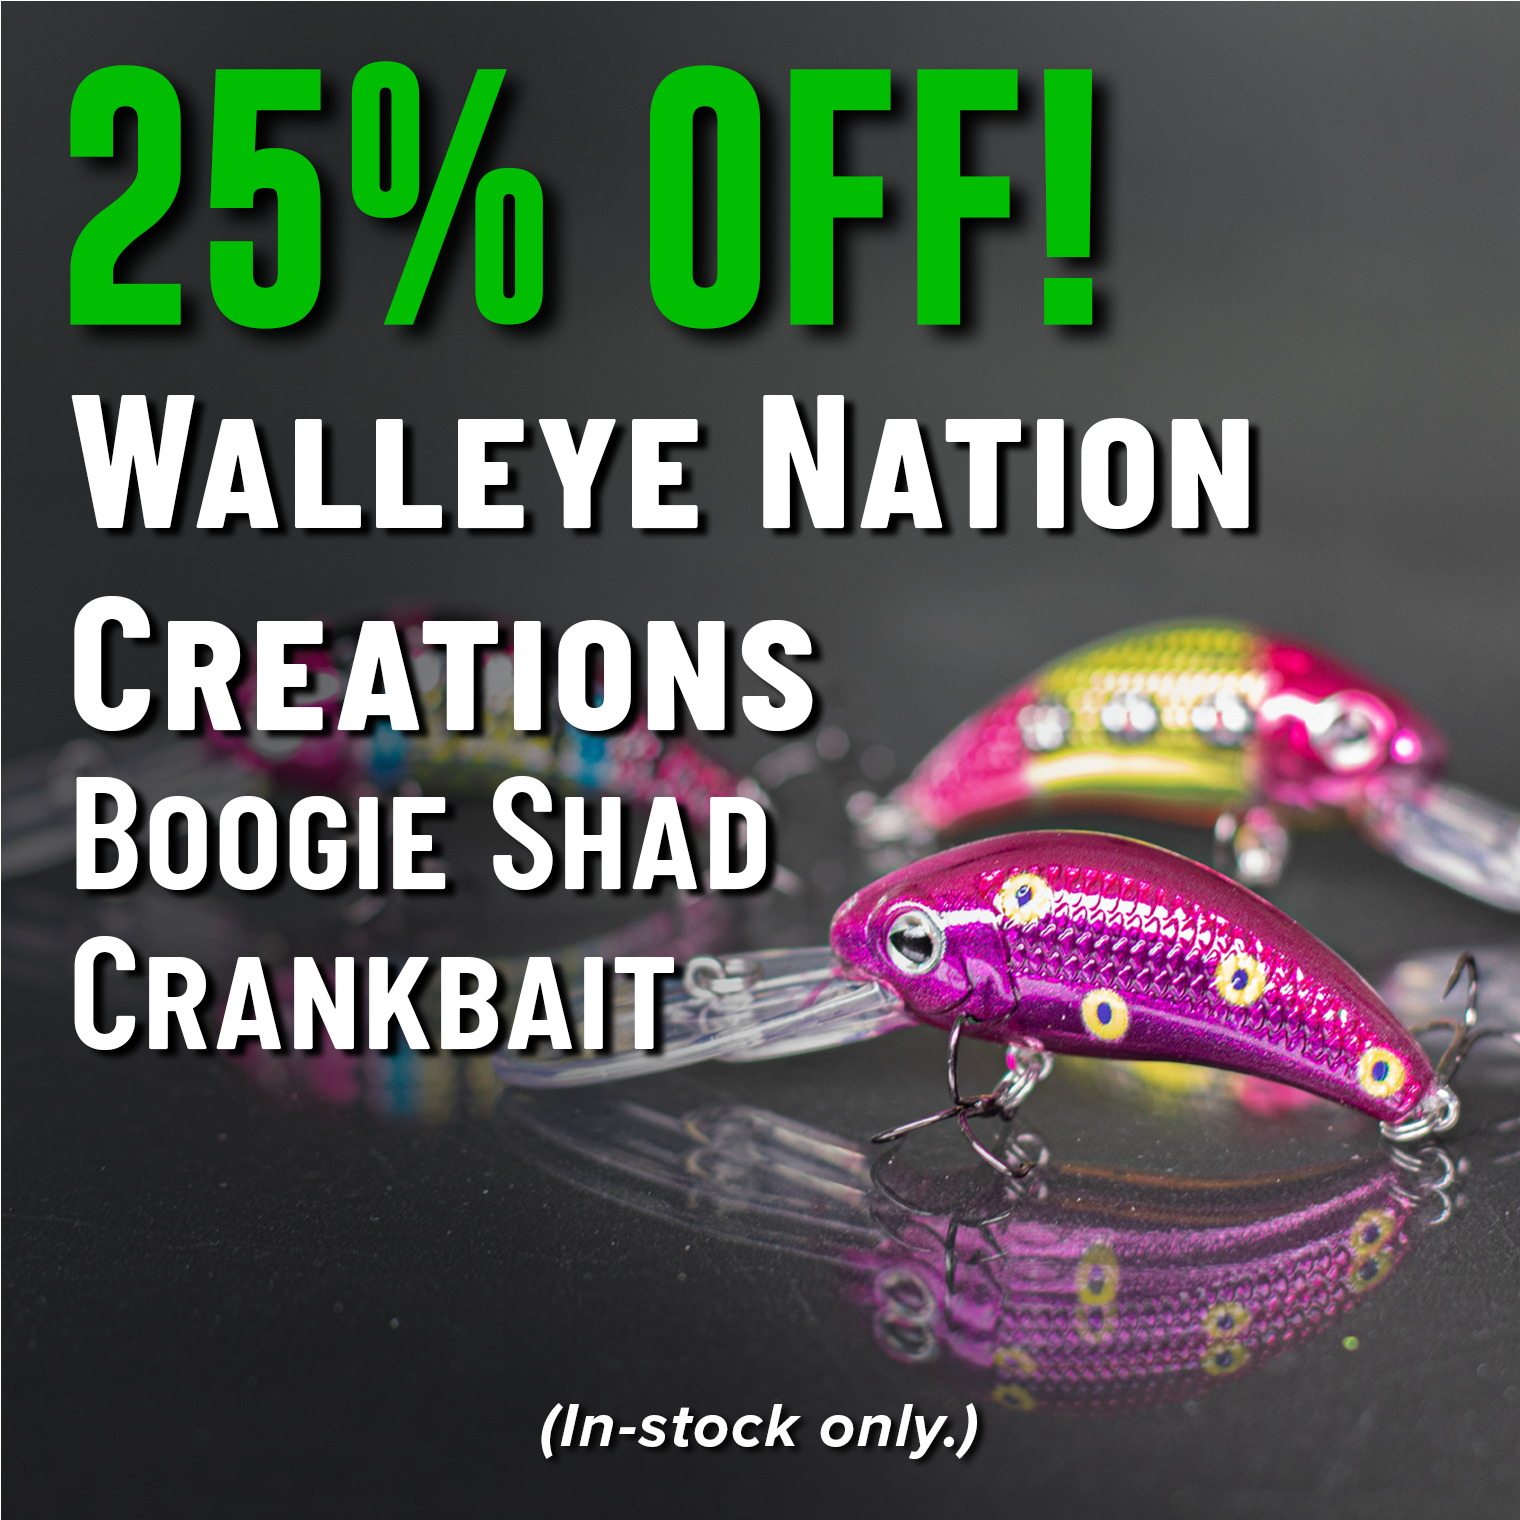 25% Off! Walleye Nation Creation Boogie Shad Crankbait (In-stock only.)